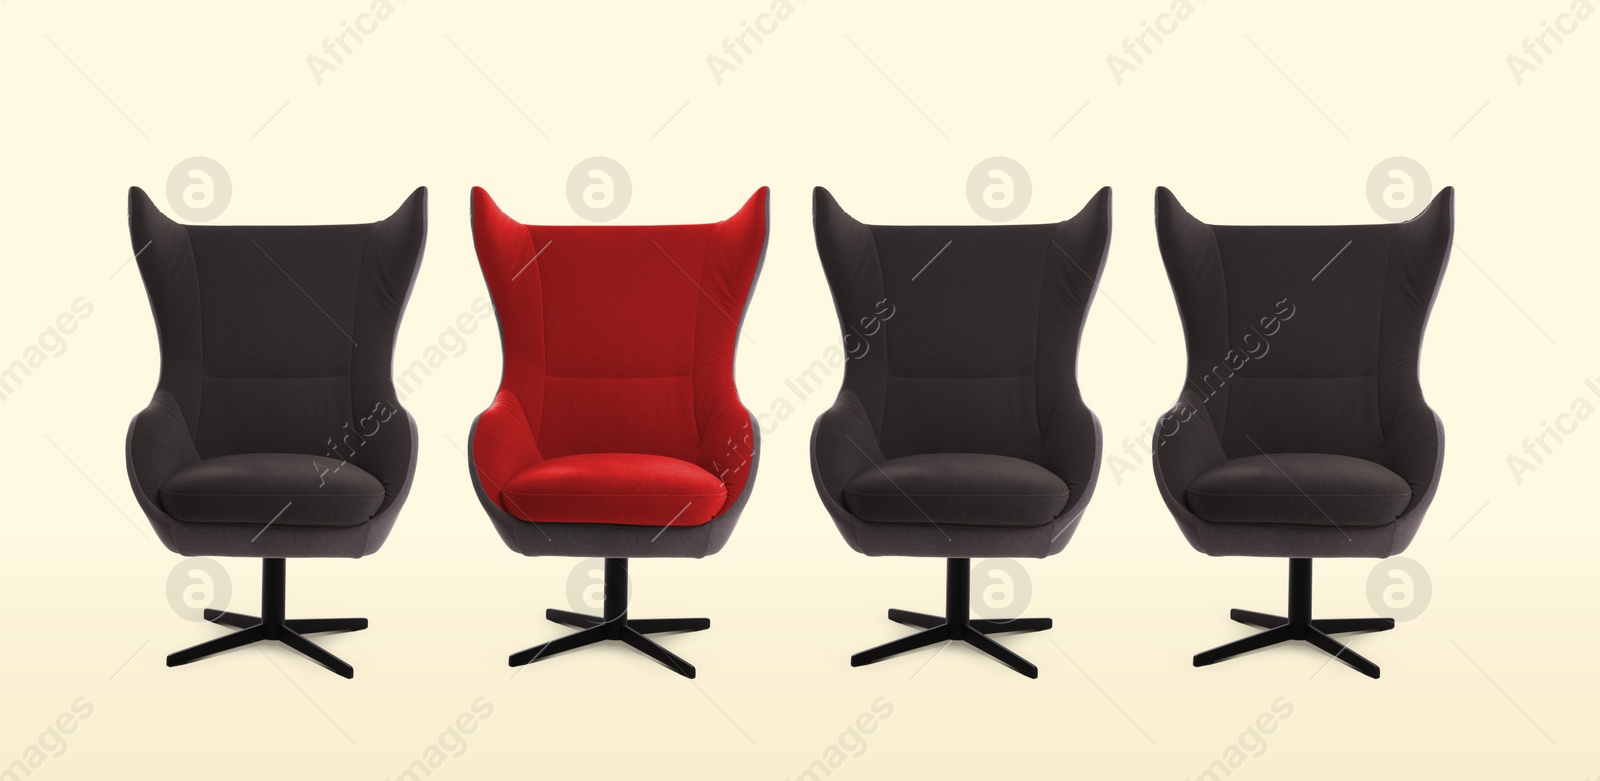 Image of Vacant position. Red office chair among dark grey ones on beige background, banner design